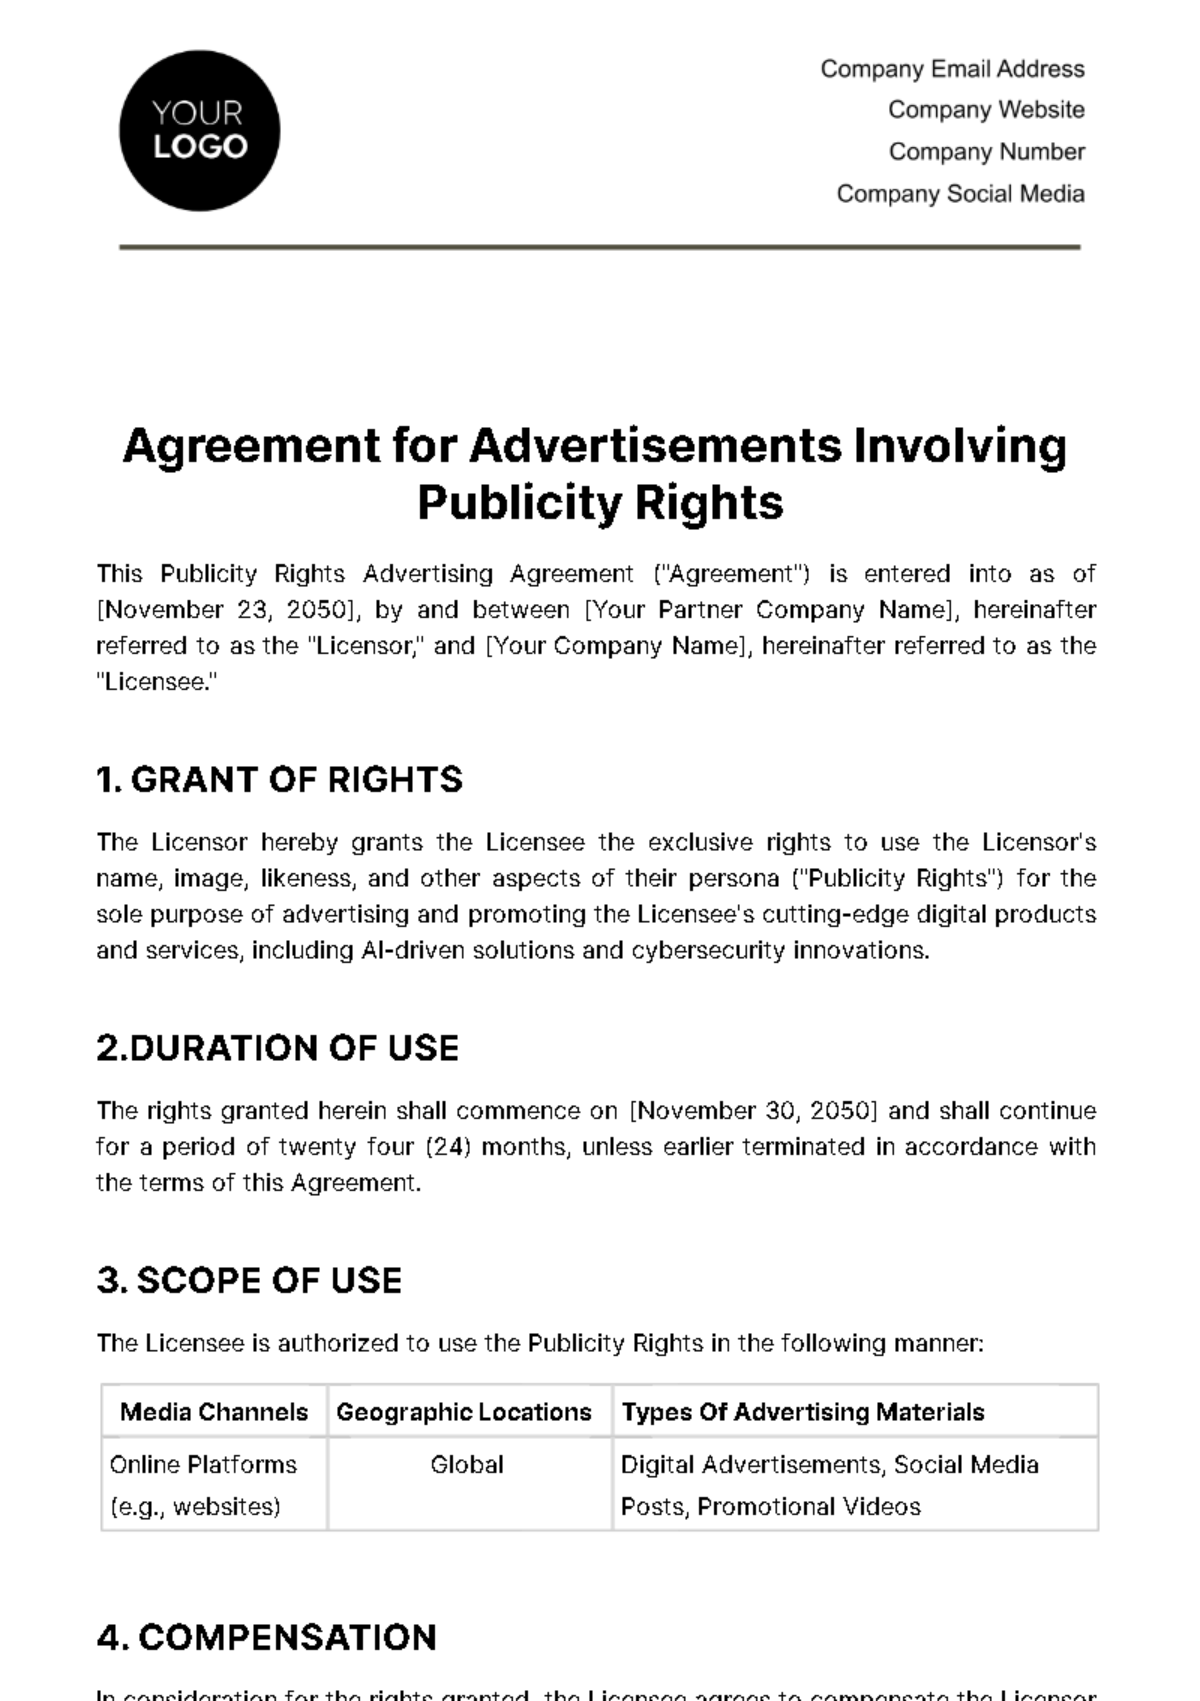 Free Publicity Rights Advertising Agreement Template